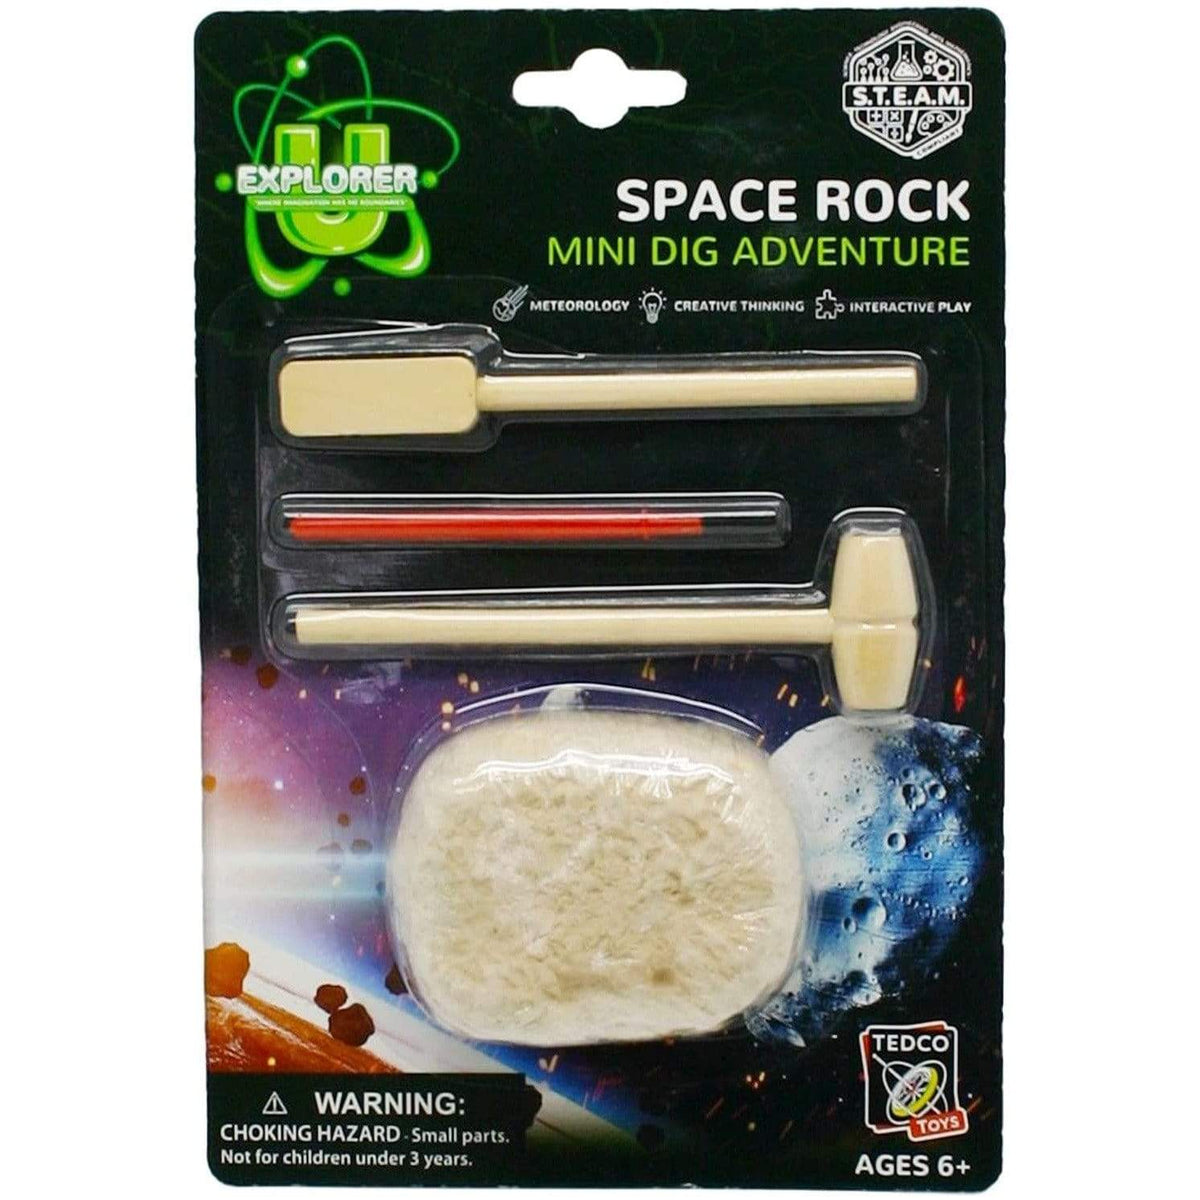 Space Rock - Mini Dig Adventure Tedco Projects/Kits